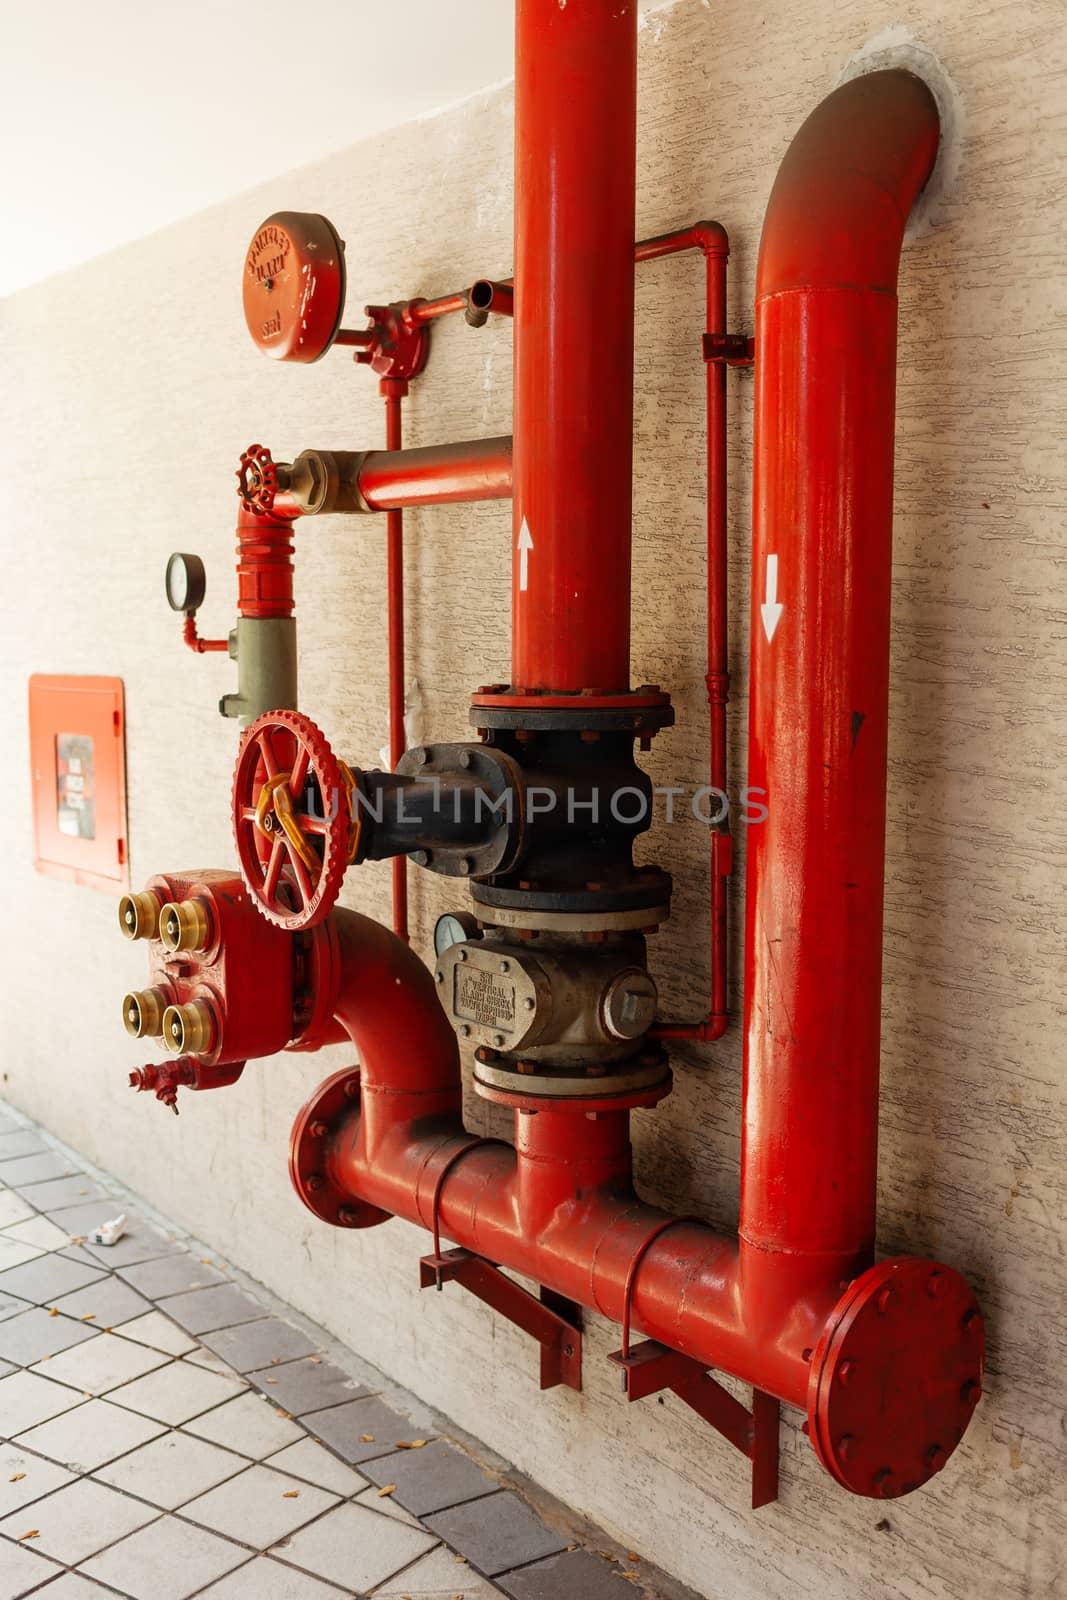 Red pipes on wall. Sprinkler alarm. Outdoor industrial equipment, Kuala Lumpur, Malaysia. by aksenovko